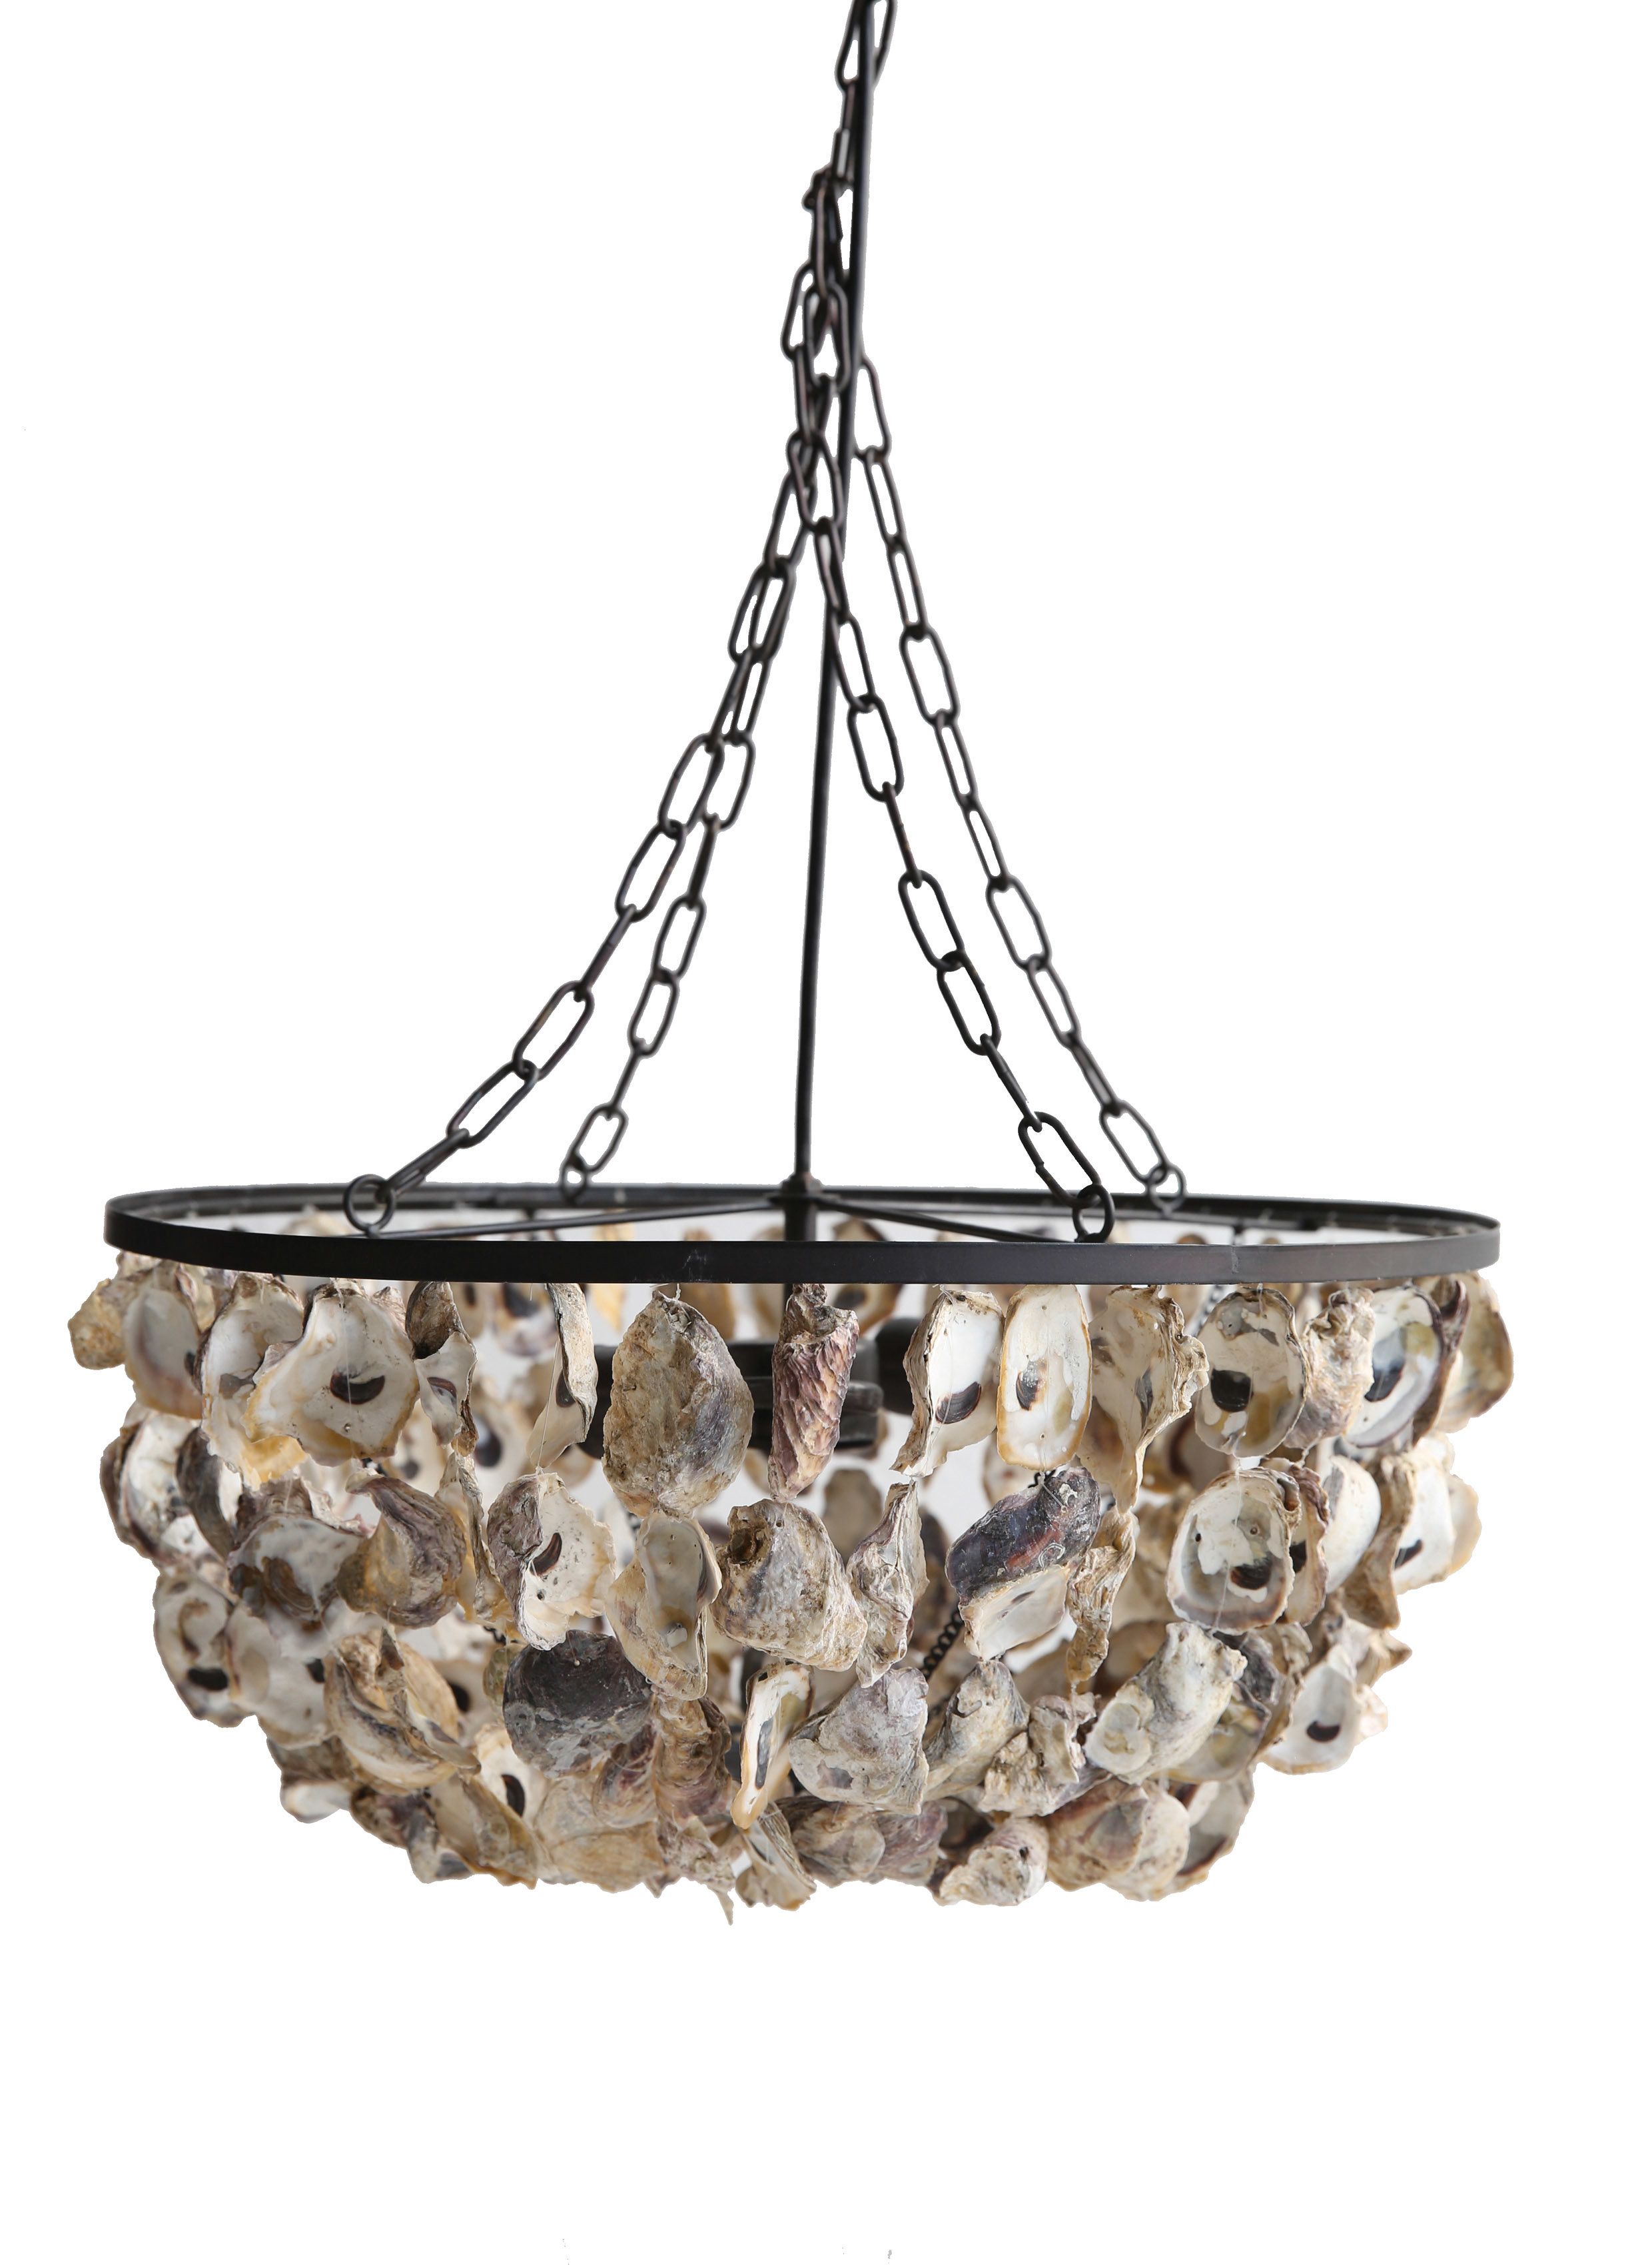 Well Liked Bramers 6 Light Novelty Chandeliers Intended For Derrek 2 Light Novelty Chandelier (View 11 of 25)